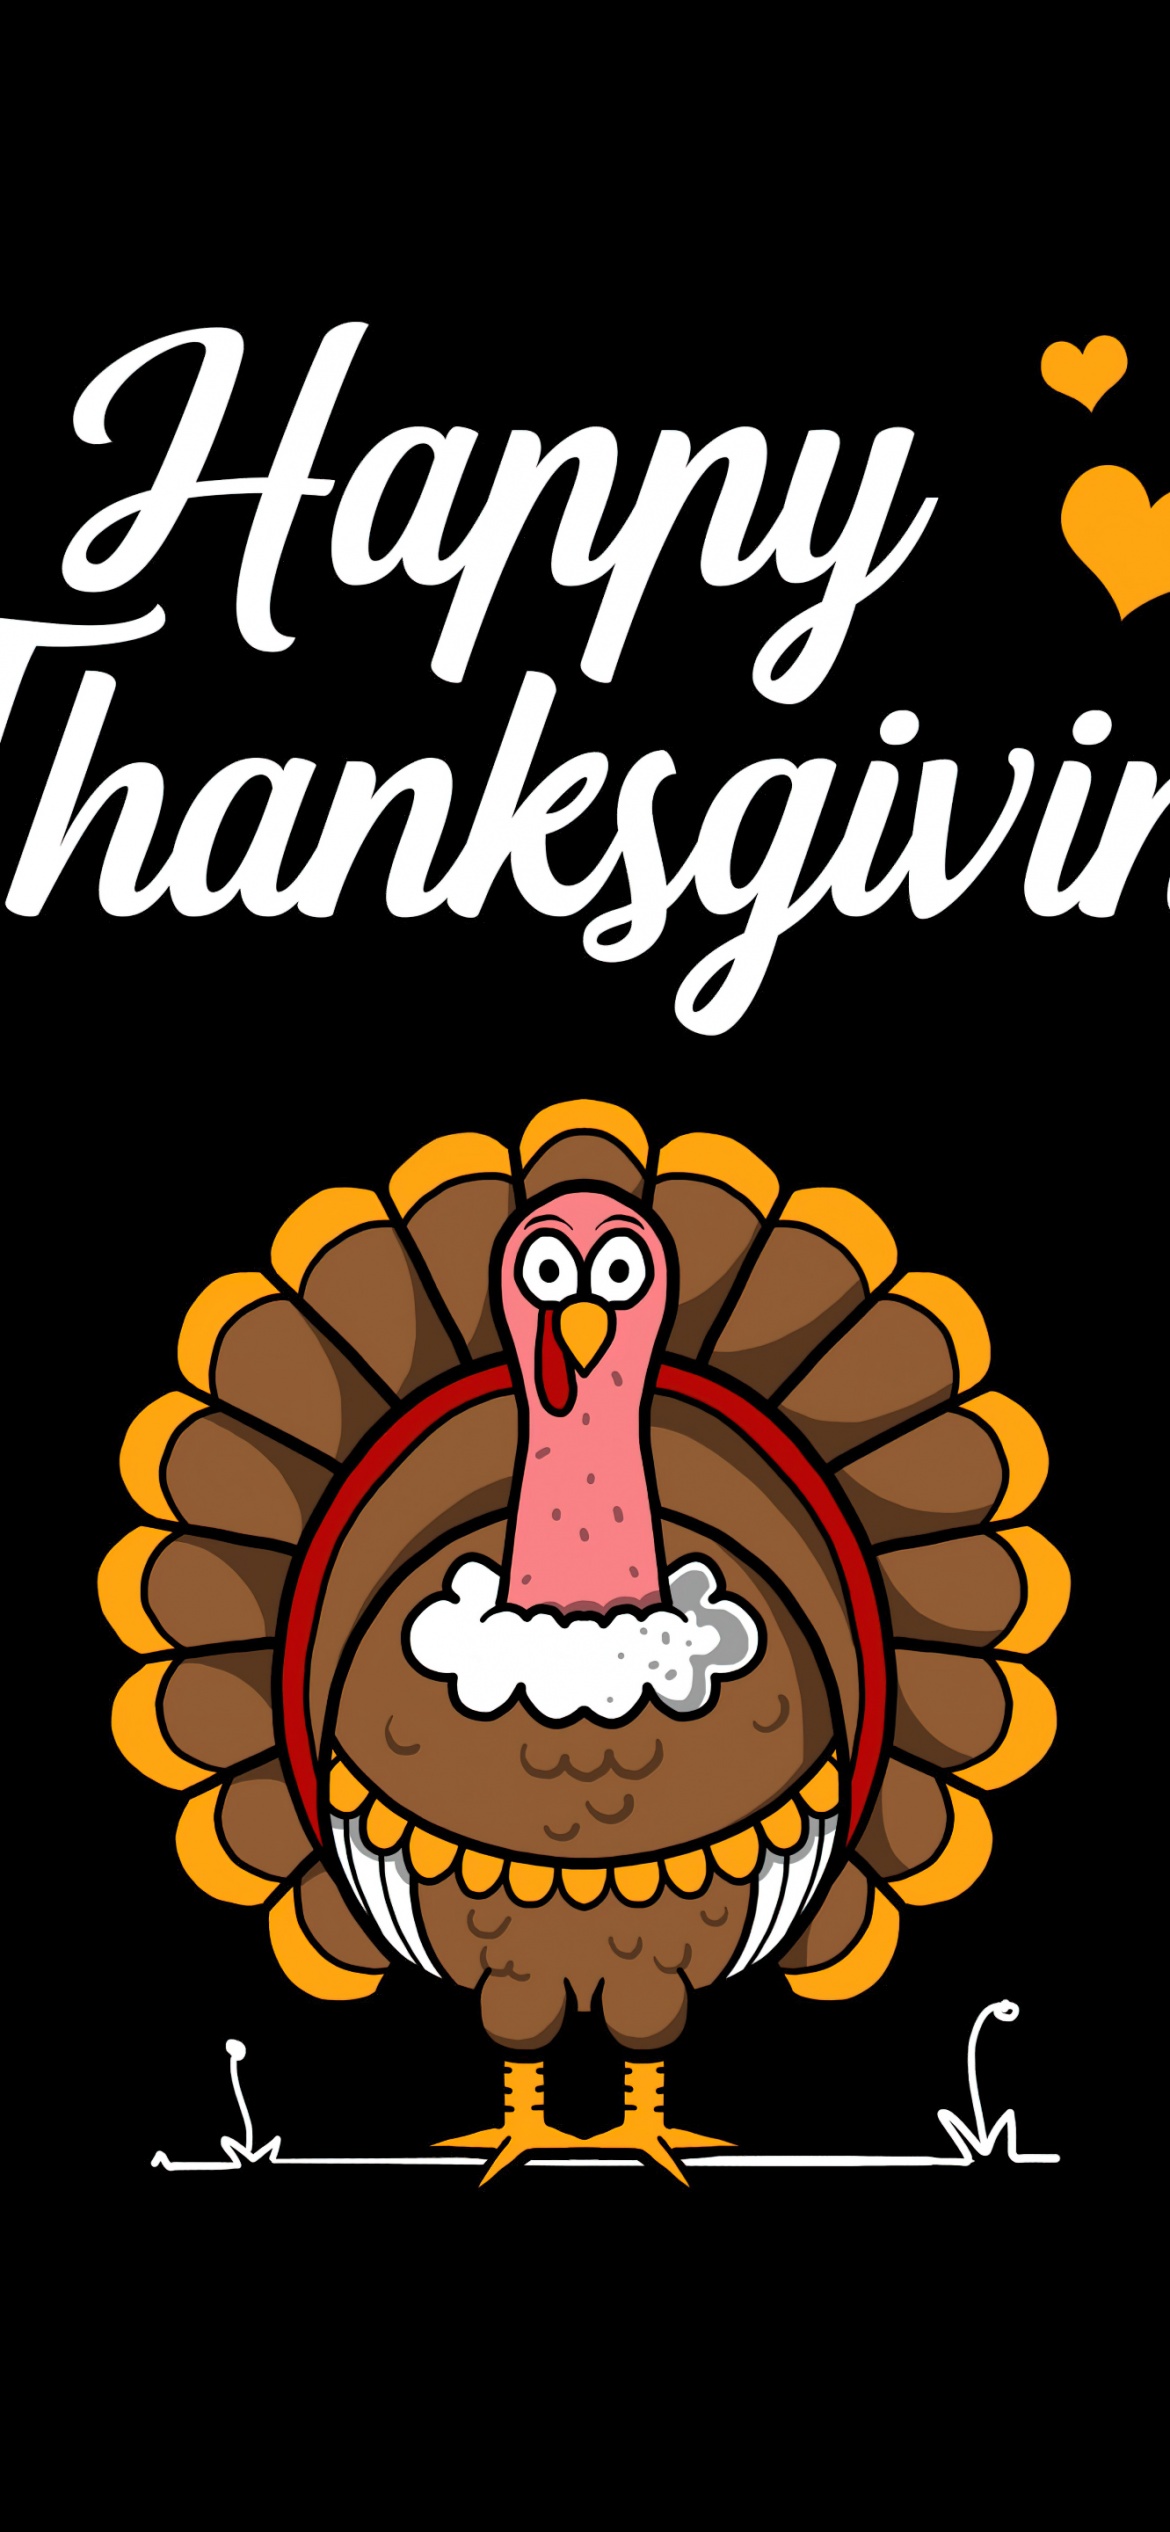 25 Happy Thanksgiving GIFs 2022  Animated Thanksgiving GIF Images